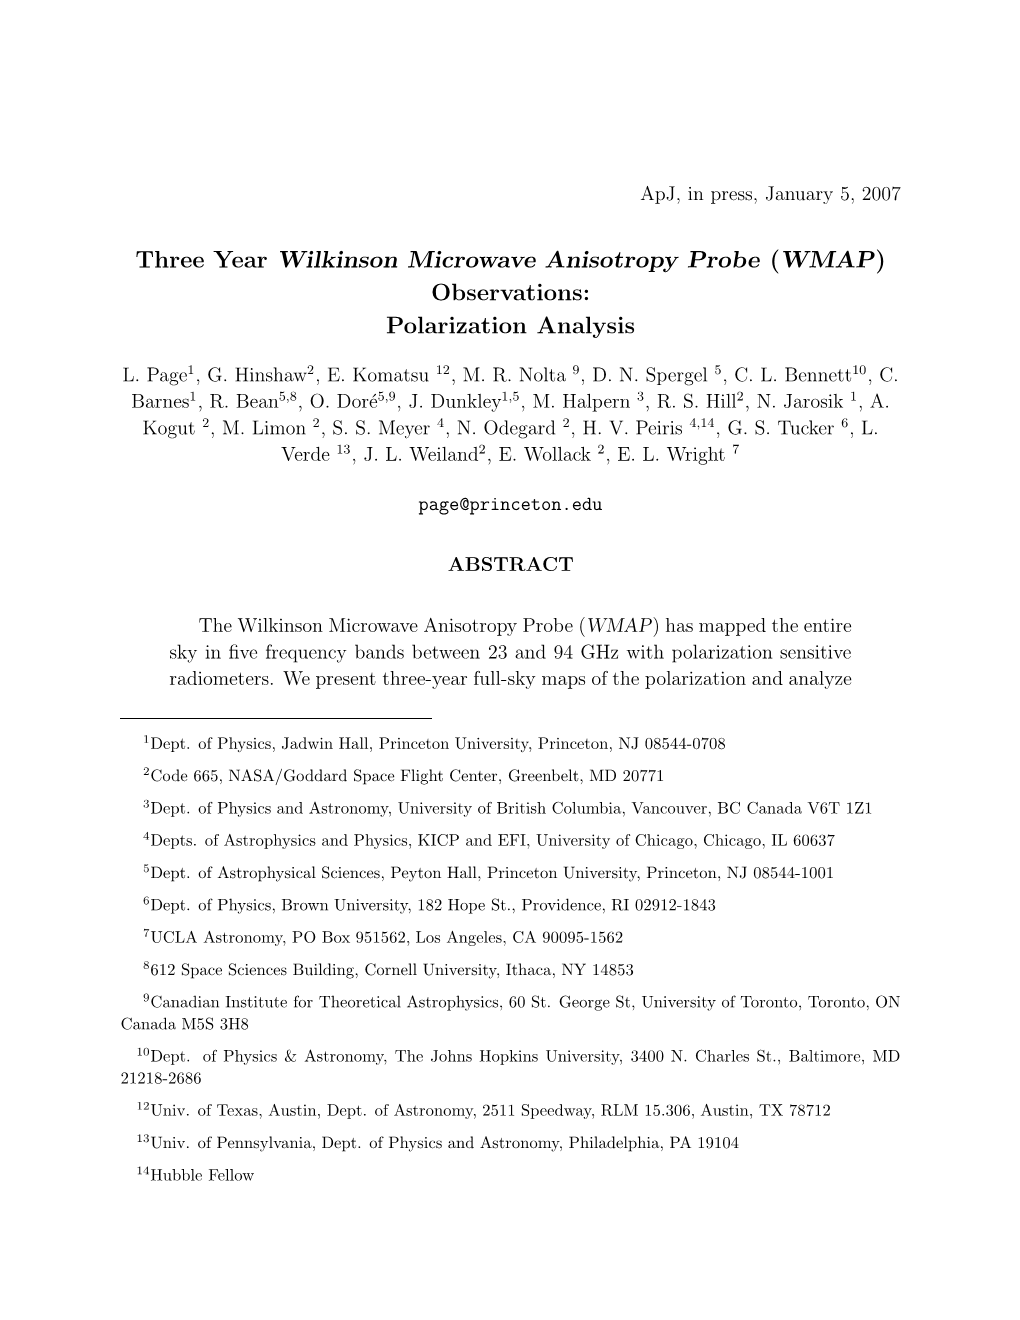 Three Year Wilkinson Microwave Anisotropy Probe (WMAP) Observations: Polarization Analysis